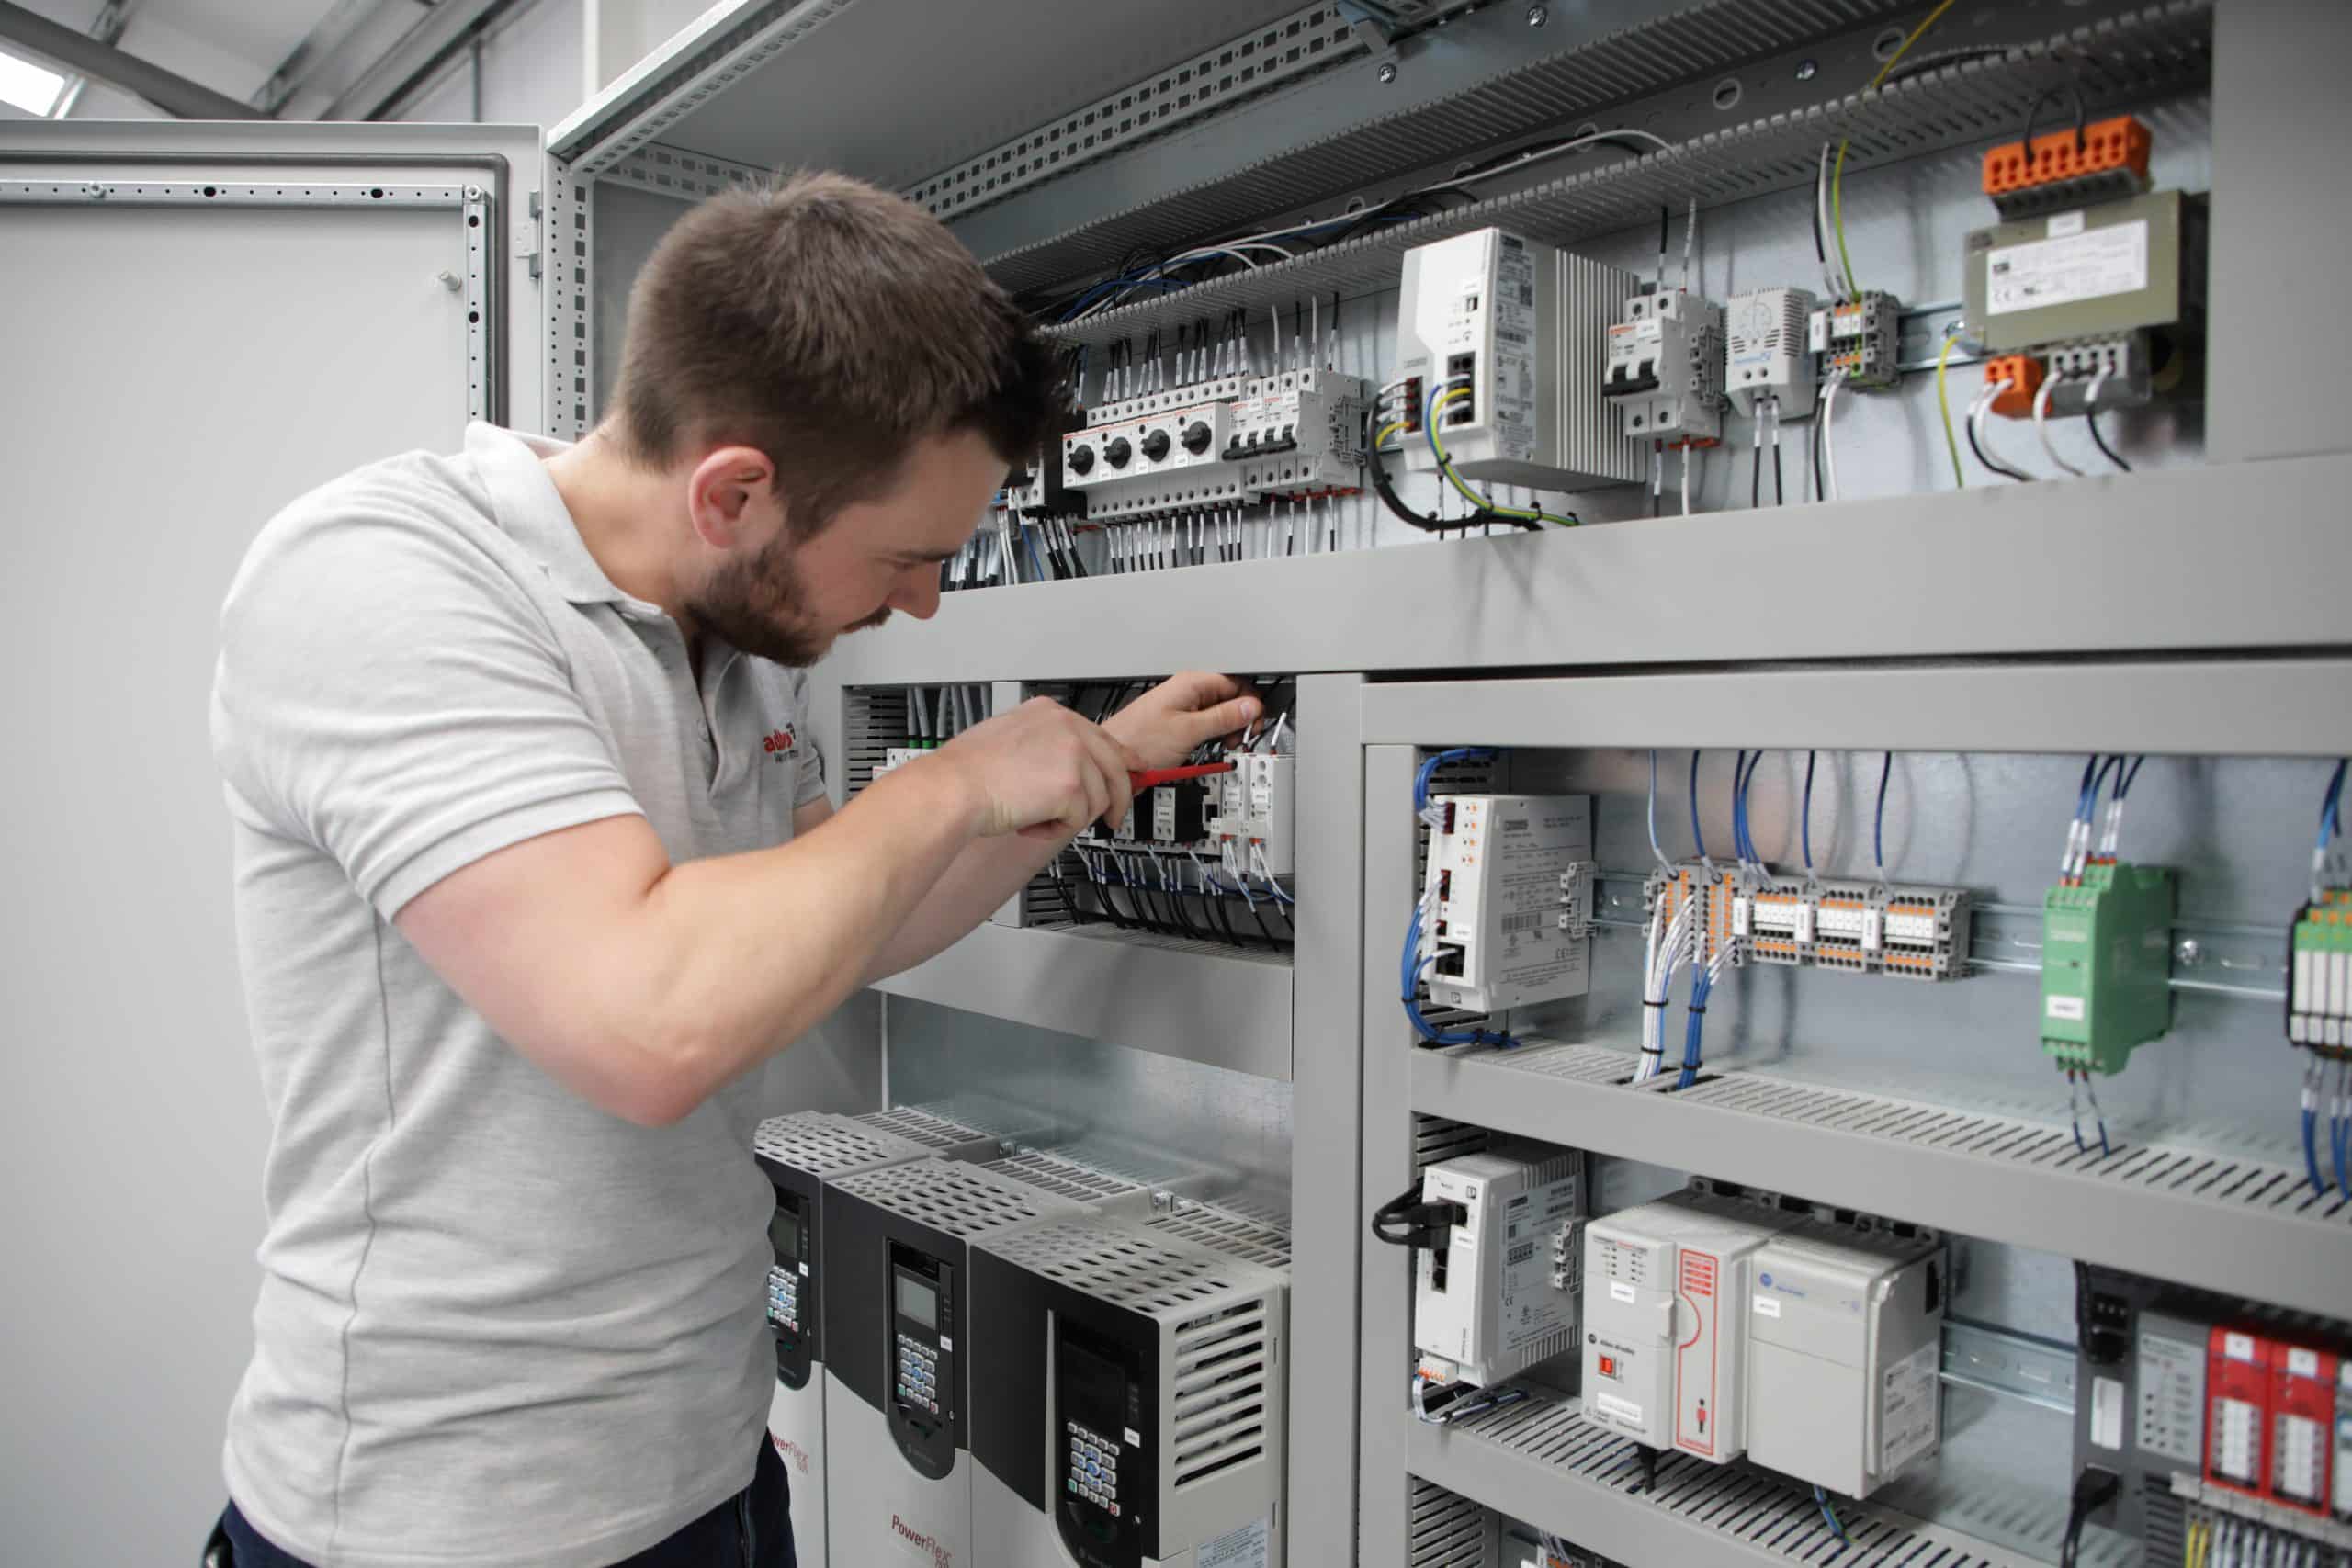 An engineer from adbro controls installing components in a control panel